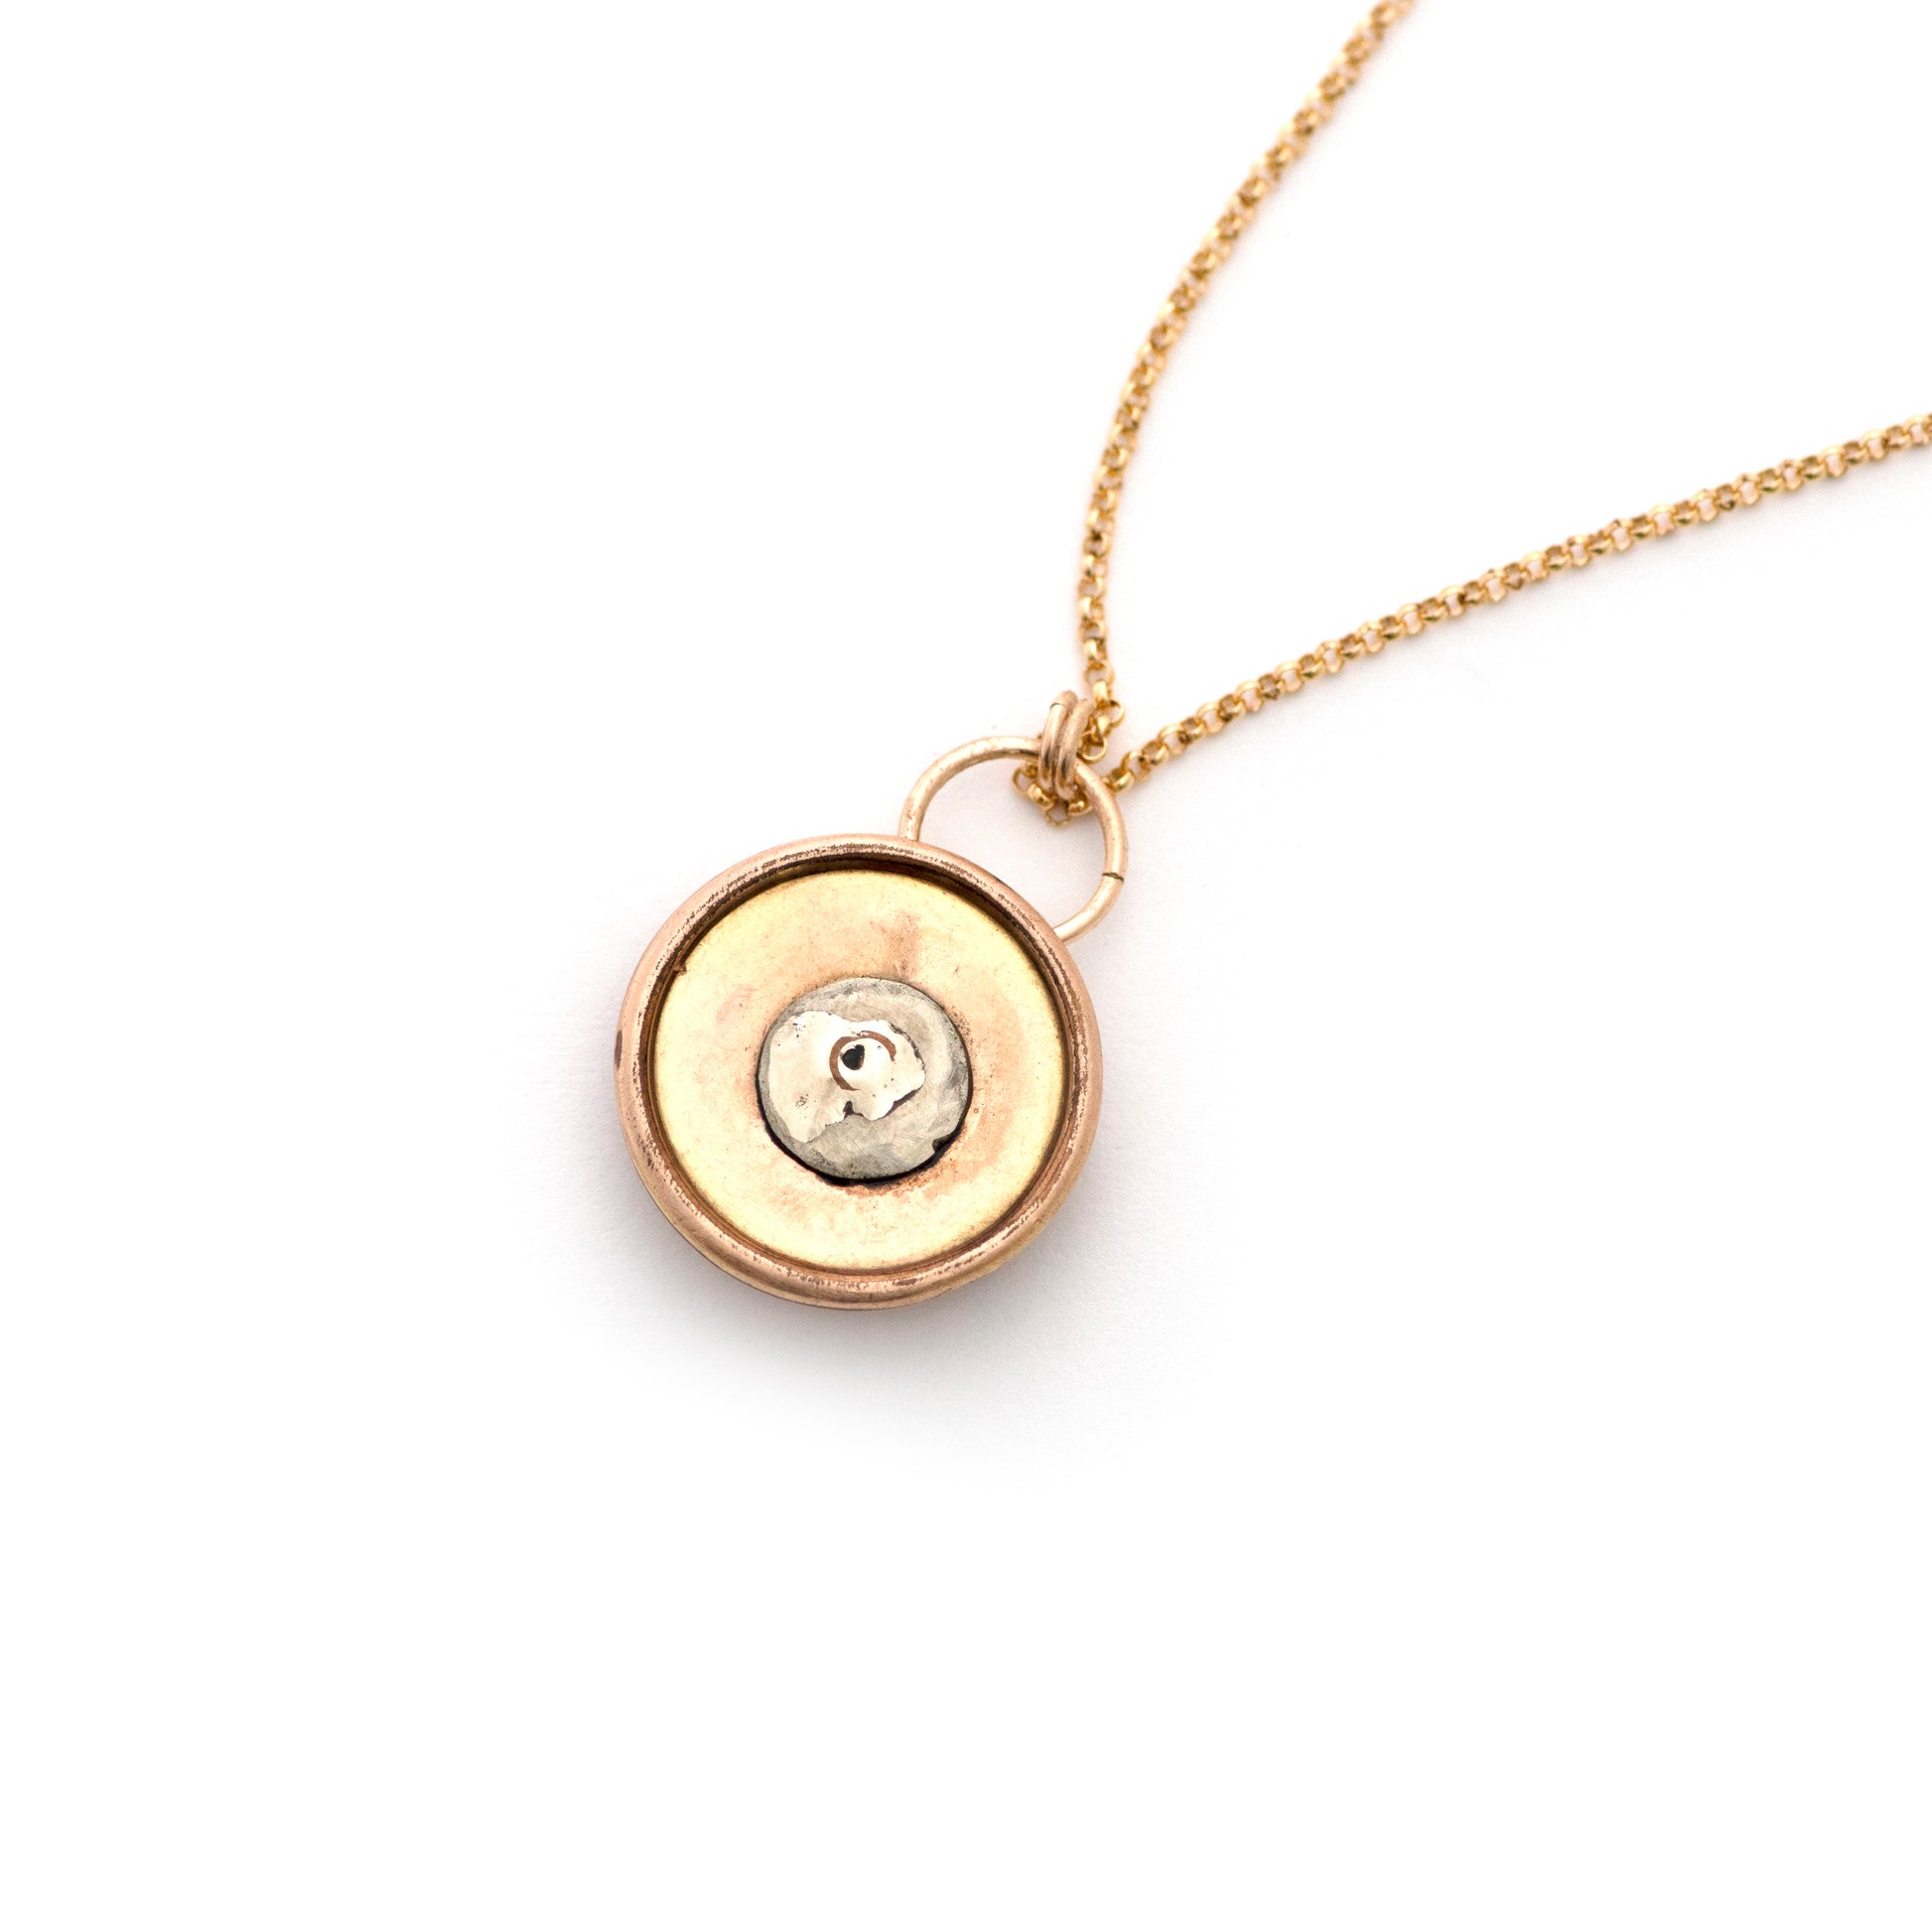 The back of an antique cufflink conversion pendant resembling a door knocker shape that is strung on a 14k gold filled chain and laying on an all white background.